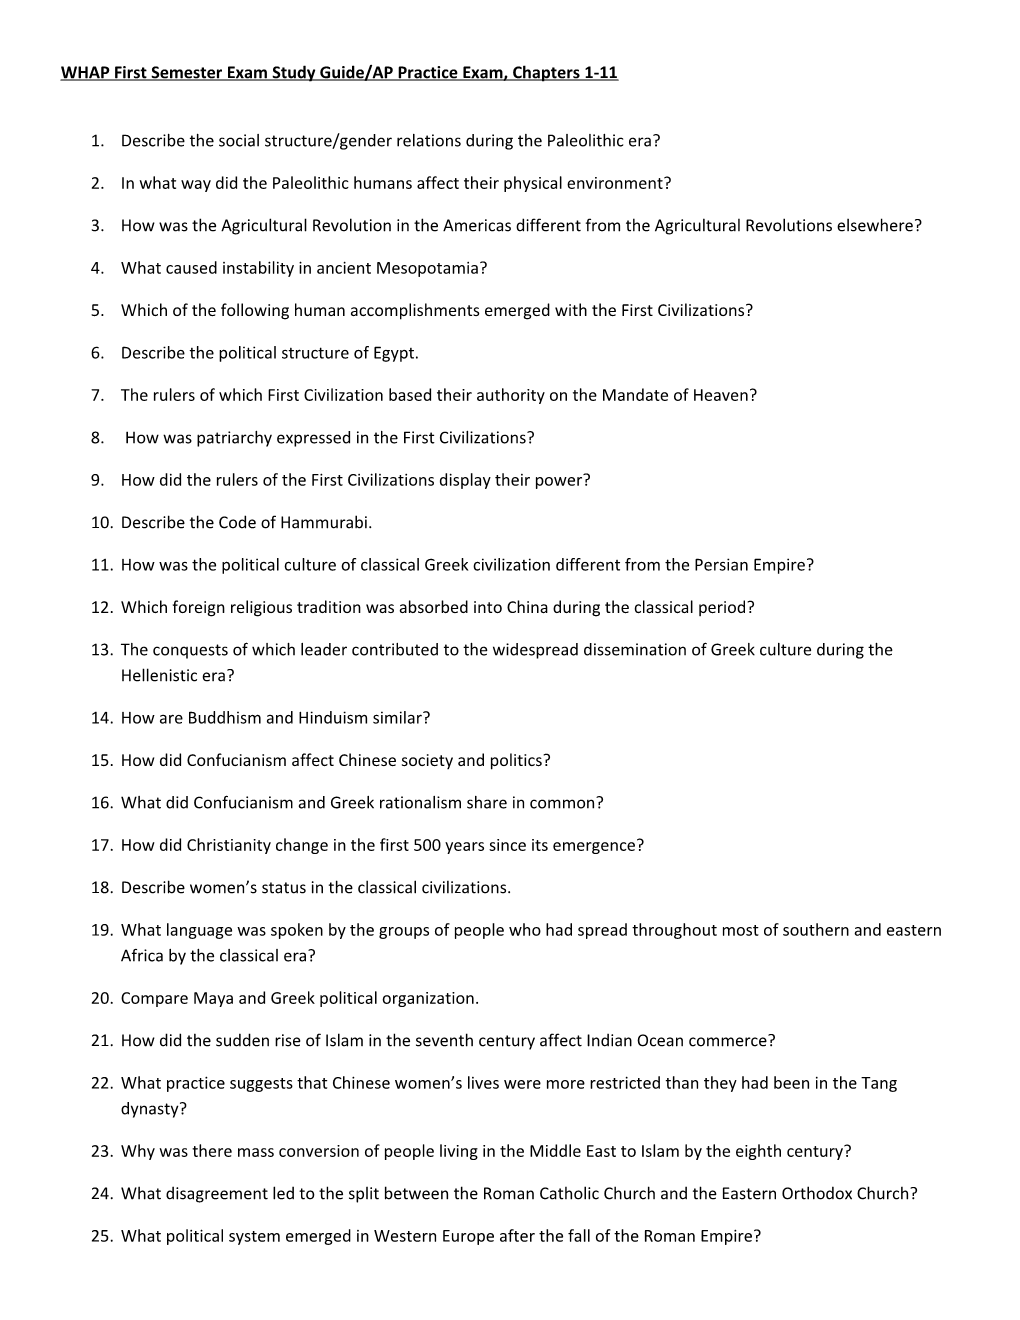 WHAP First Semester Exam Study Guide/AP Practice Exam, Chapters 1-11